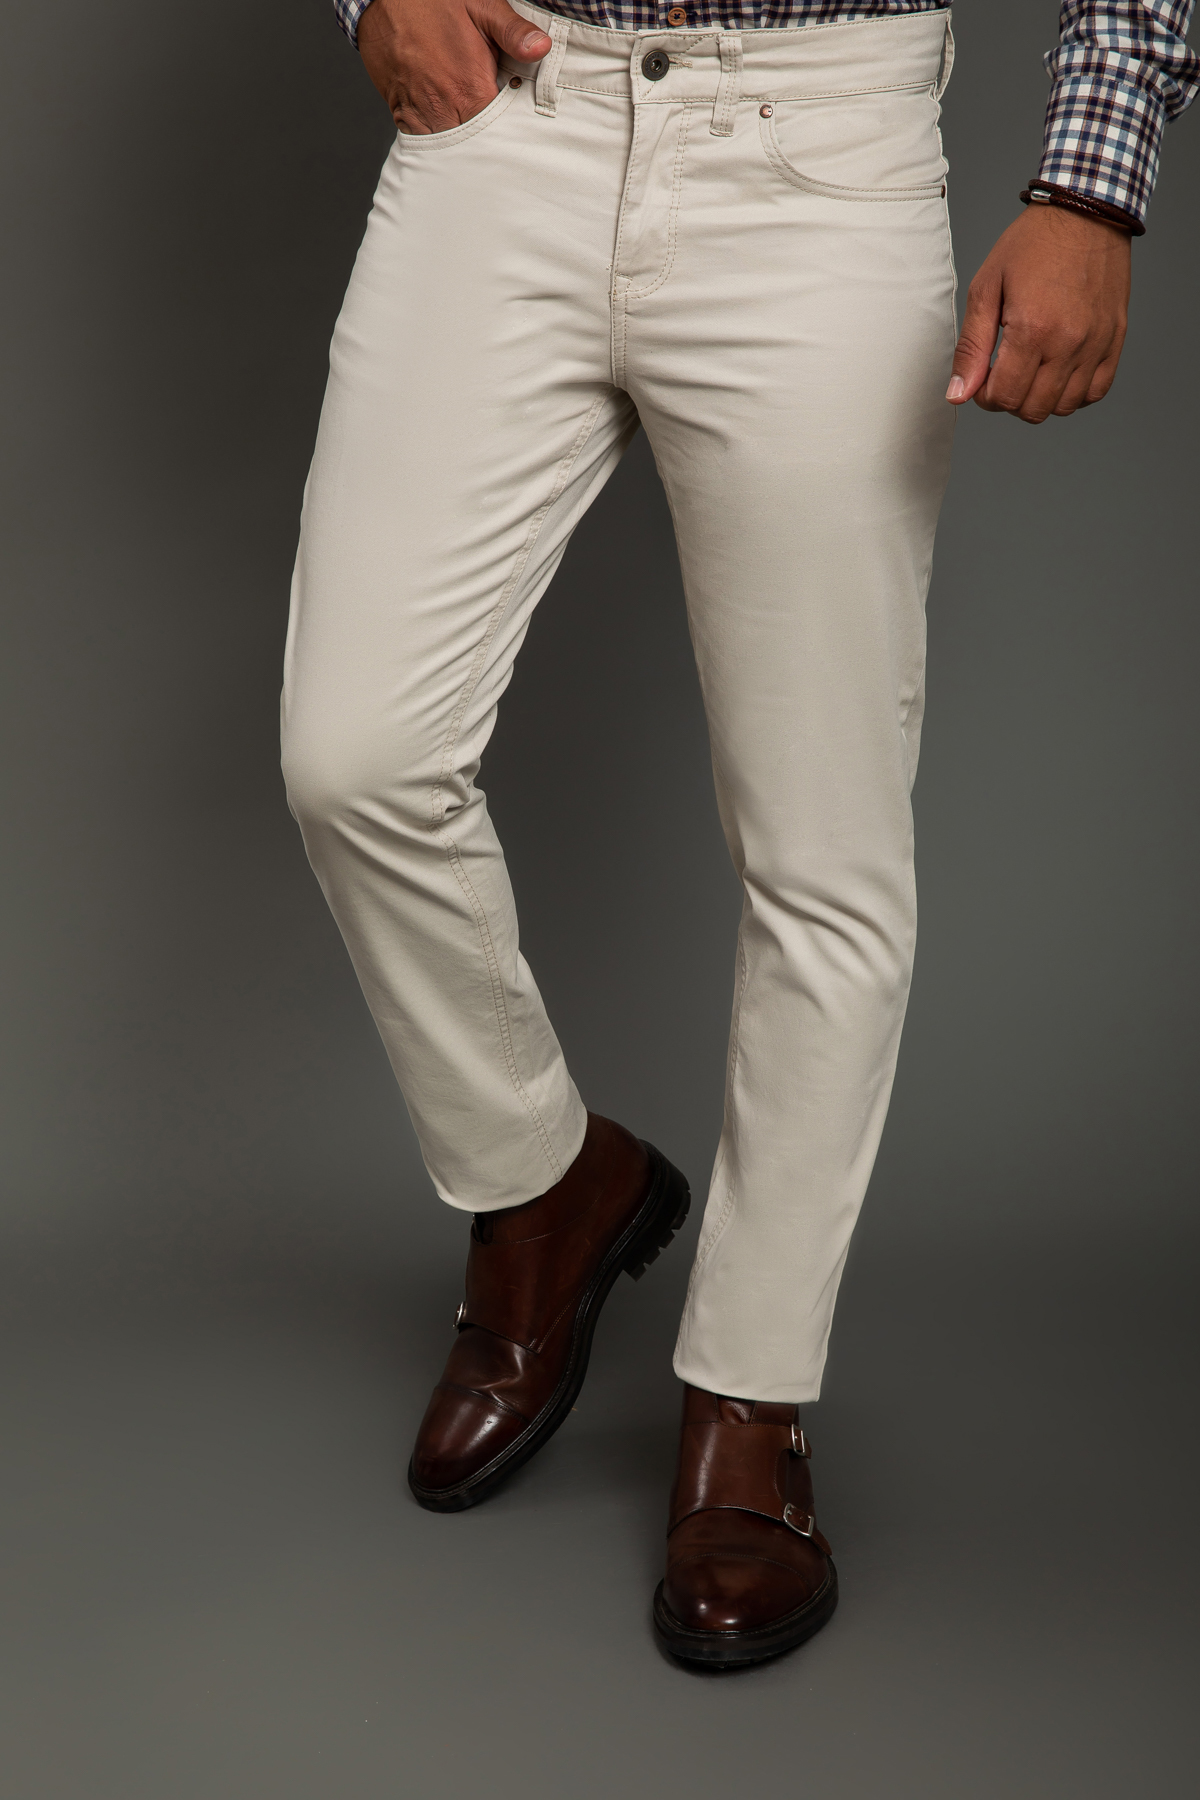 SLIM FIT CHINO TROUSERS 42679 price in Egypt